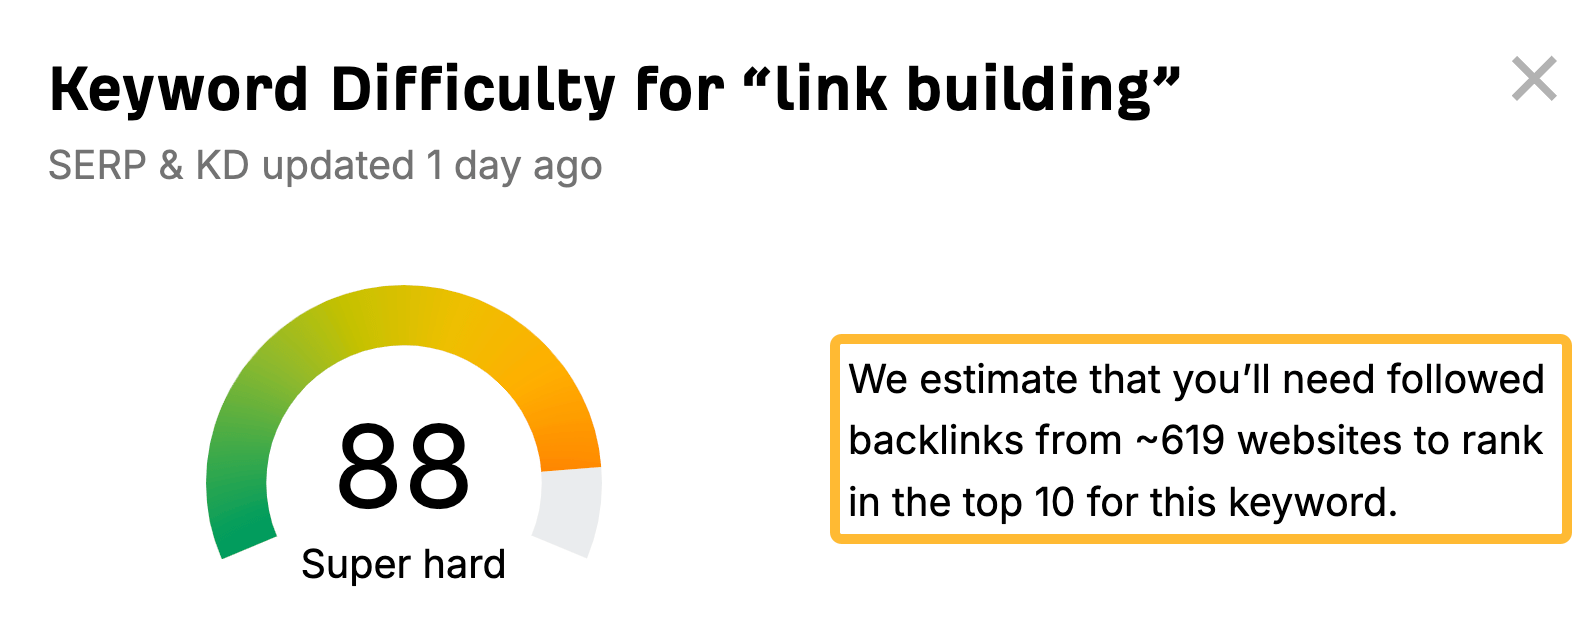 Keyword Difficulty Checker estimates that you'll need followed backlinks from 619 websites to rank in the top 10 for "link building"